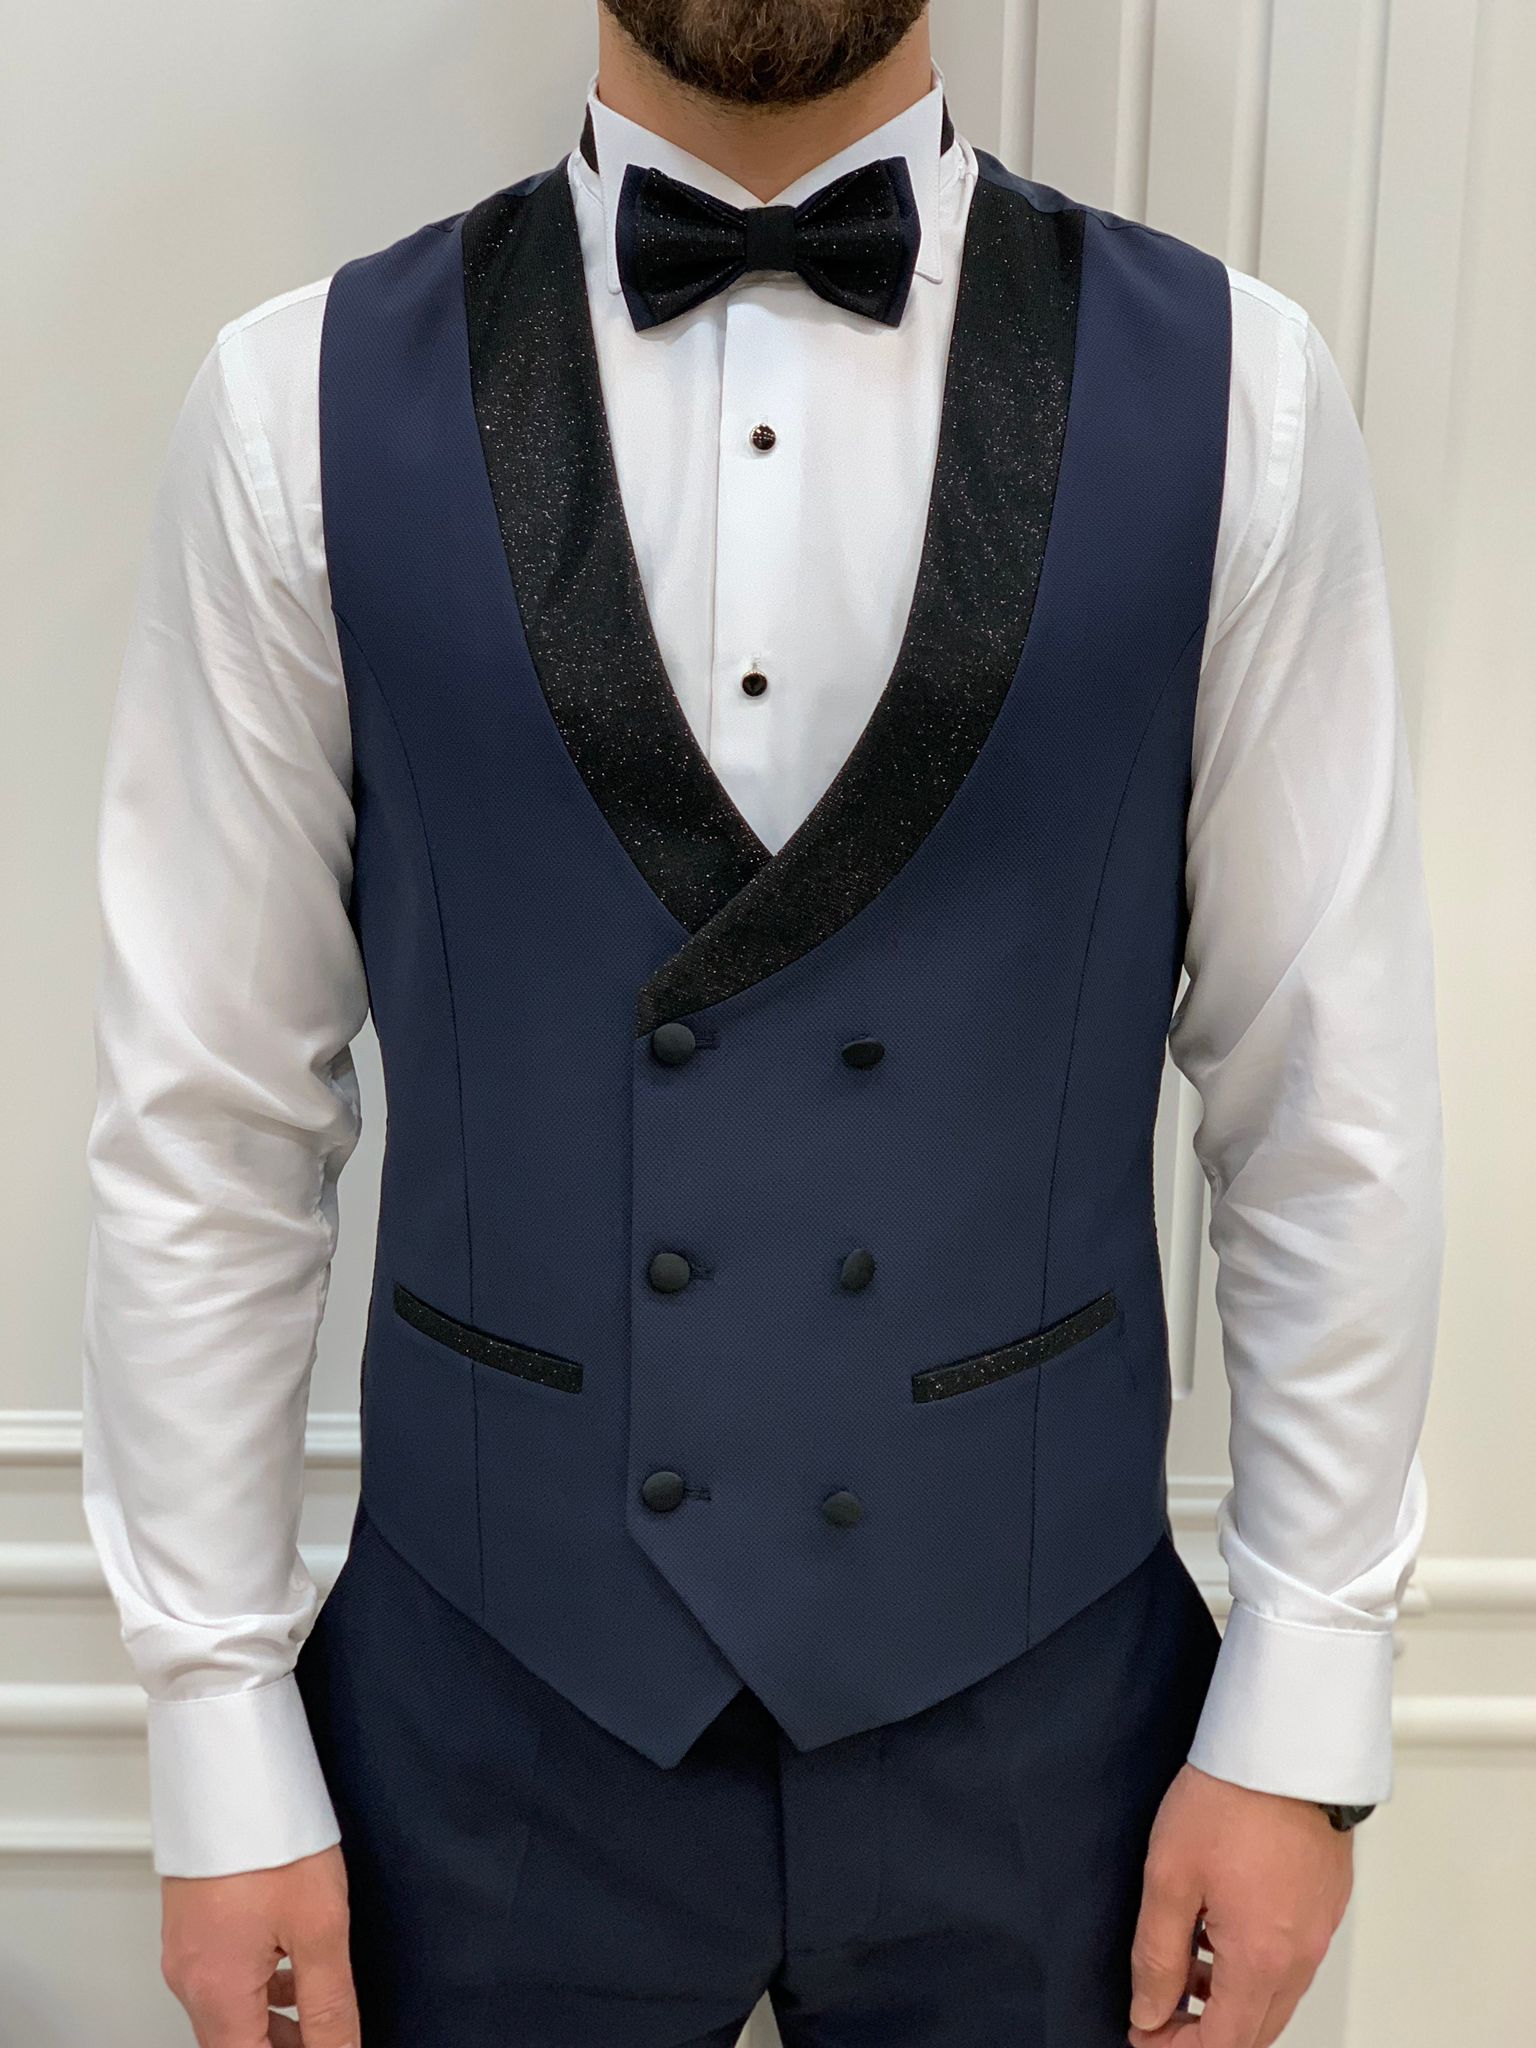 Men White Suit Navy Shawl Lapel Groom Tuxedos Formal Wedding Party Dinner  Suit